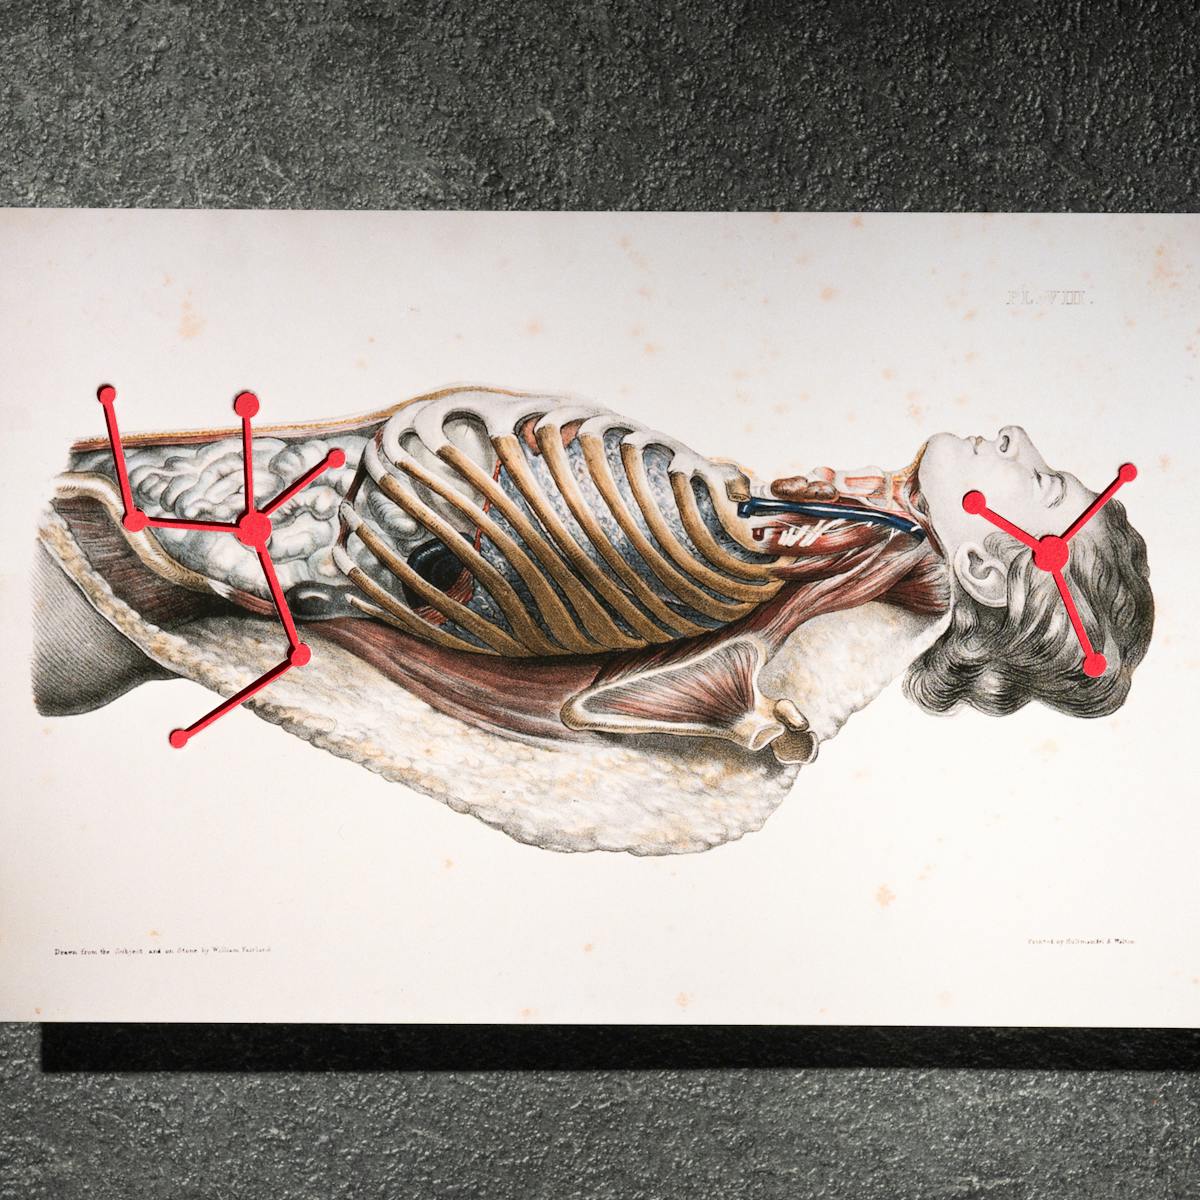 A photograph of a picture displaying a dissected man. Inter-connected red circles are shown over the mans stomach and head.